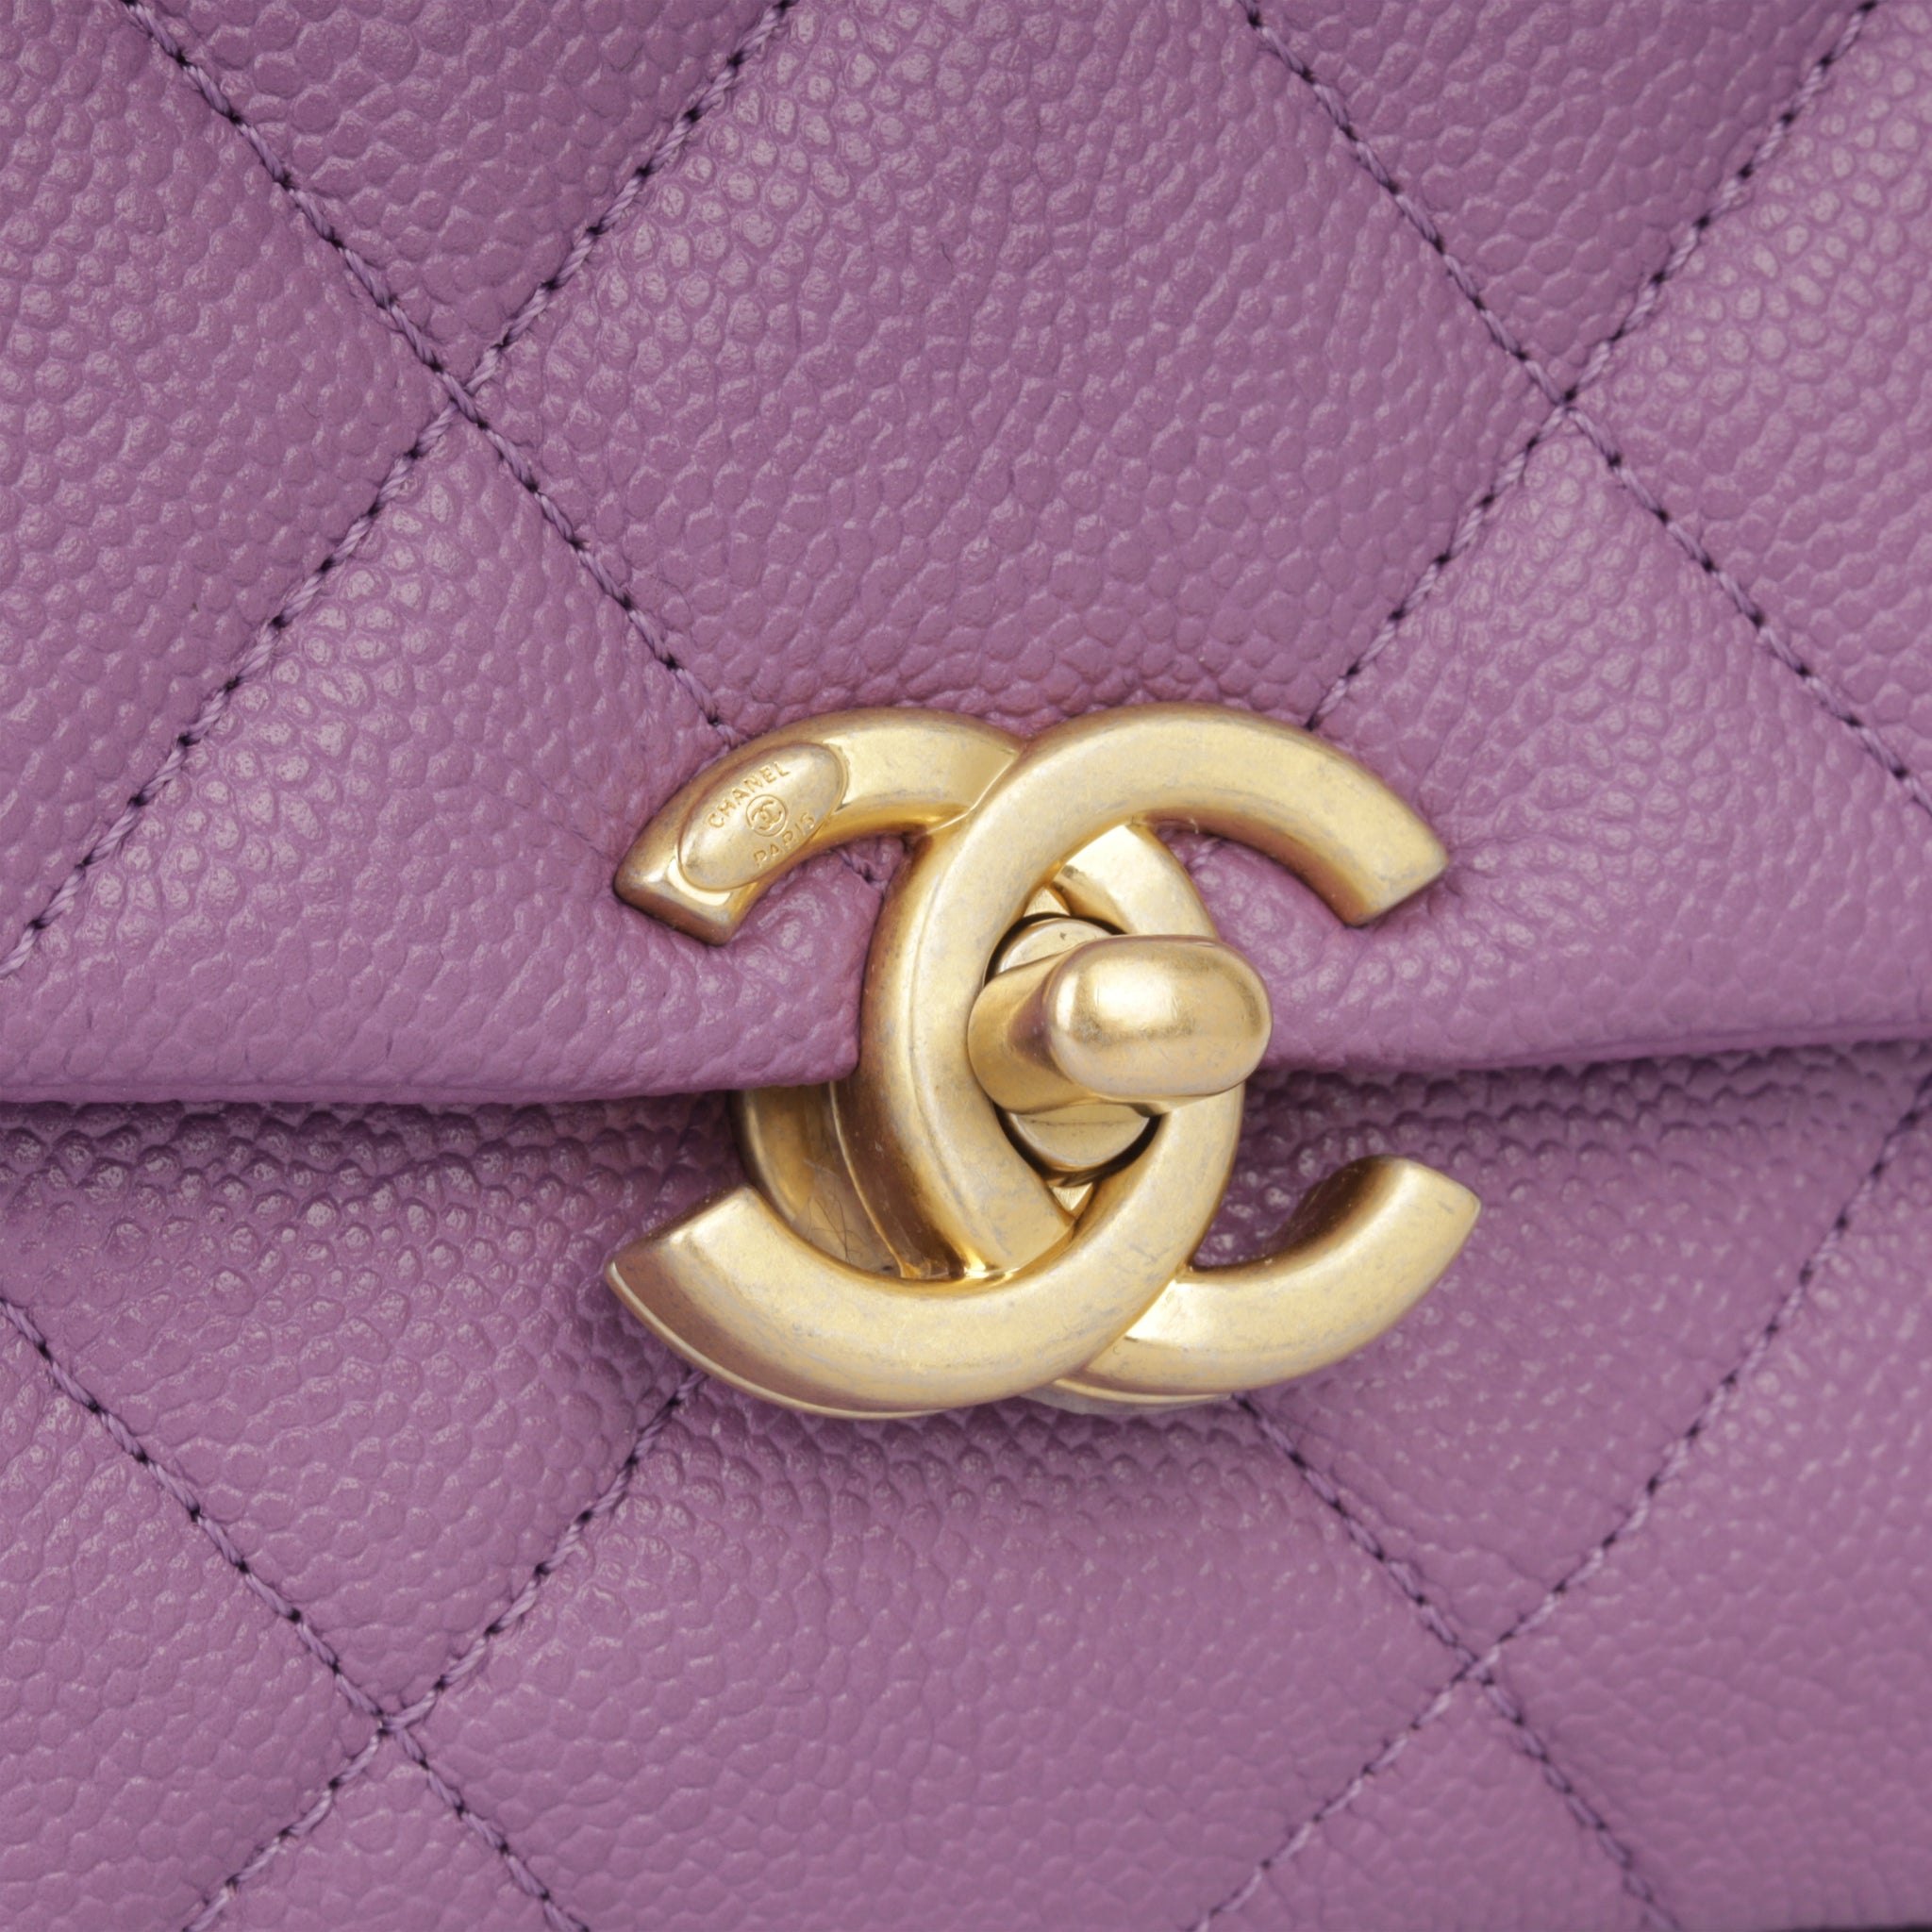 Chanel Small Chain Melody Flap Bag